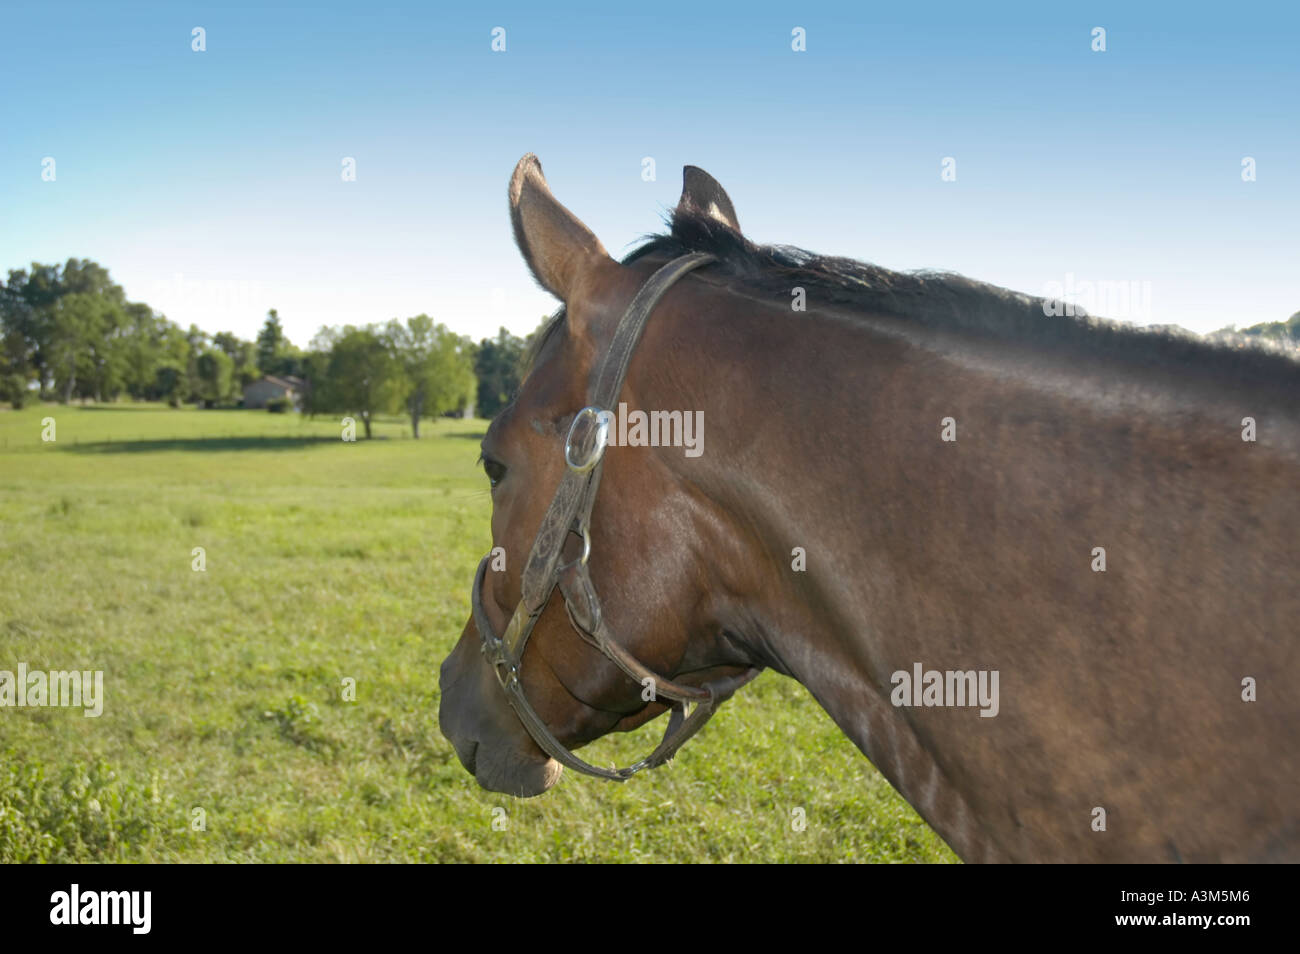 Head of thoroughbred race horse Stock Photo